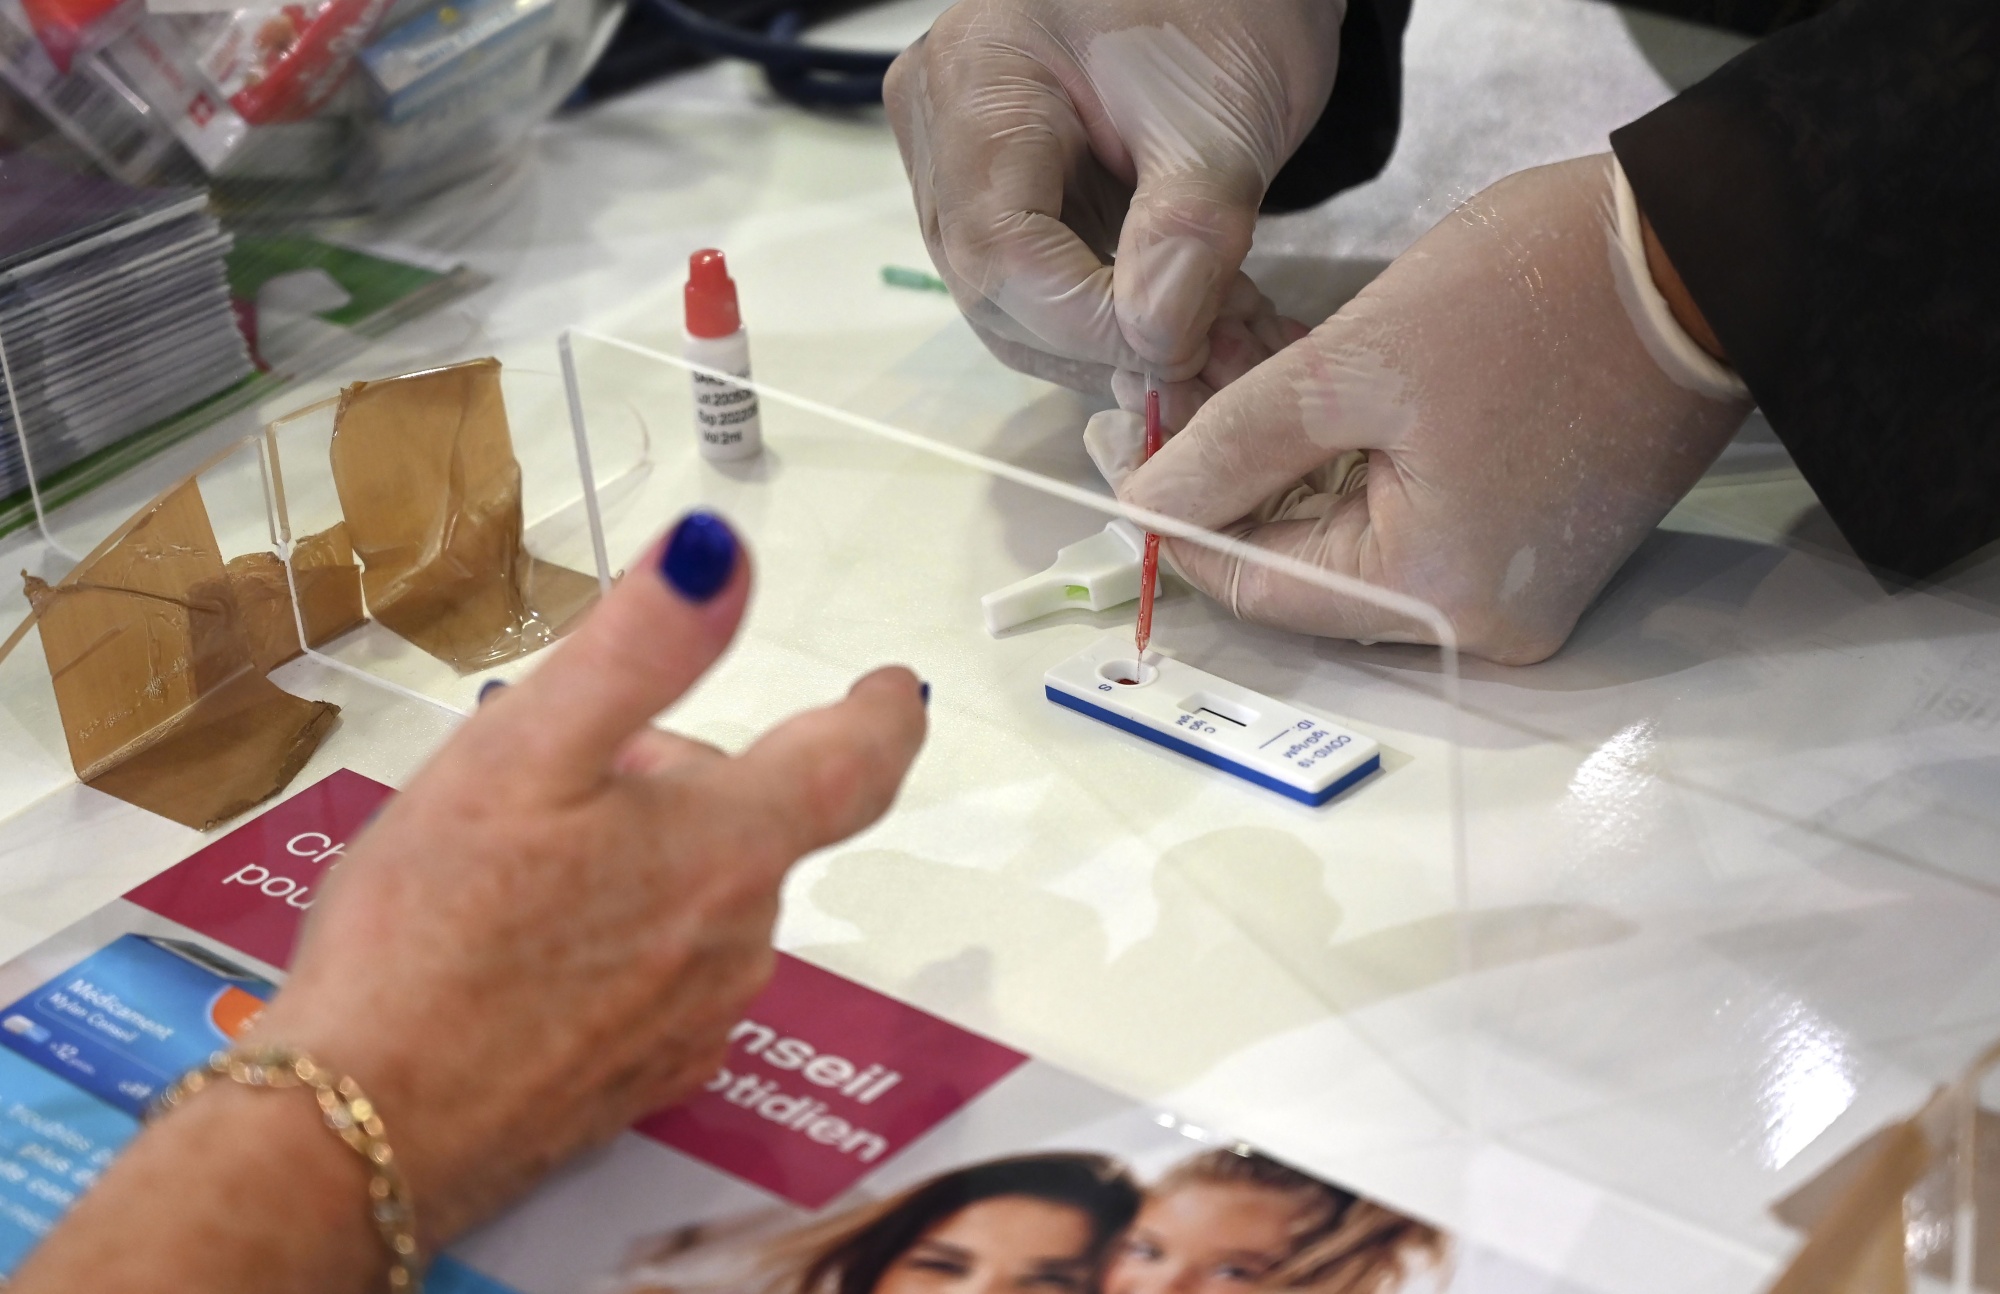 A medical professional conducts a test using a dropper and test strip while a person with a painted fingernail observes.